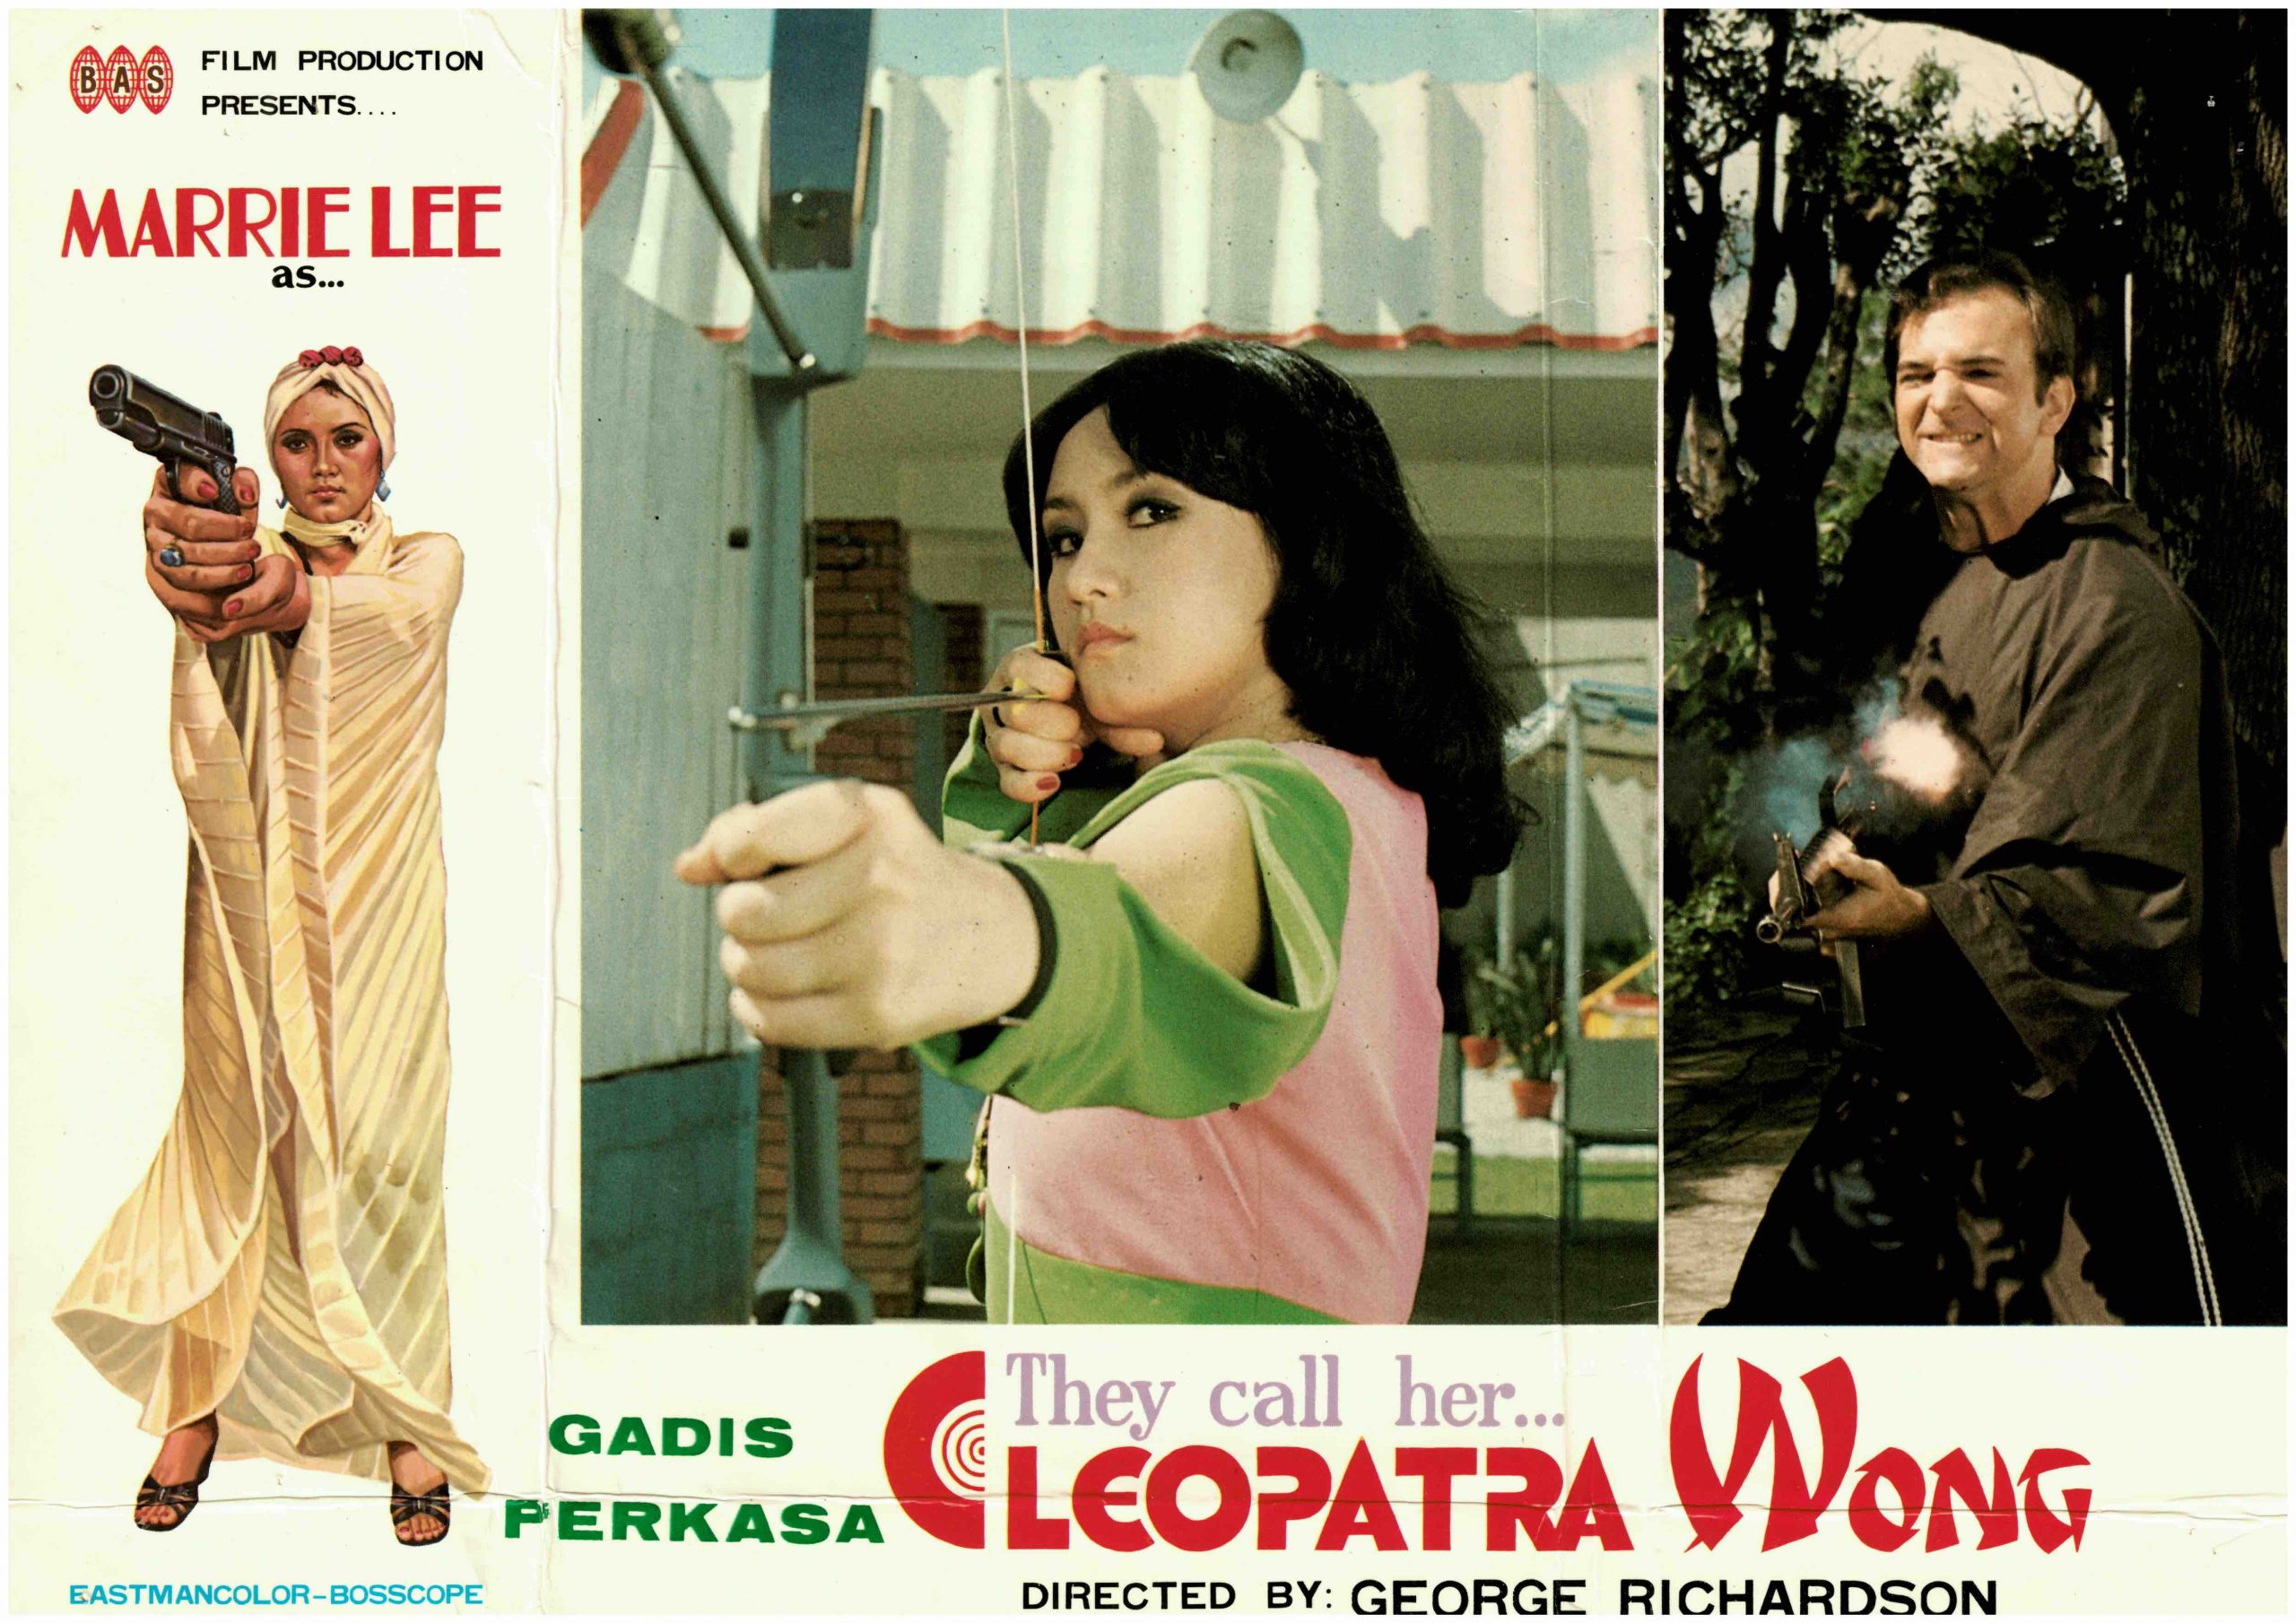 Lobby card from "They Call Her…Cleopatra Wong "(1978). Photo: Doris Young (Marrie Lee)